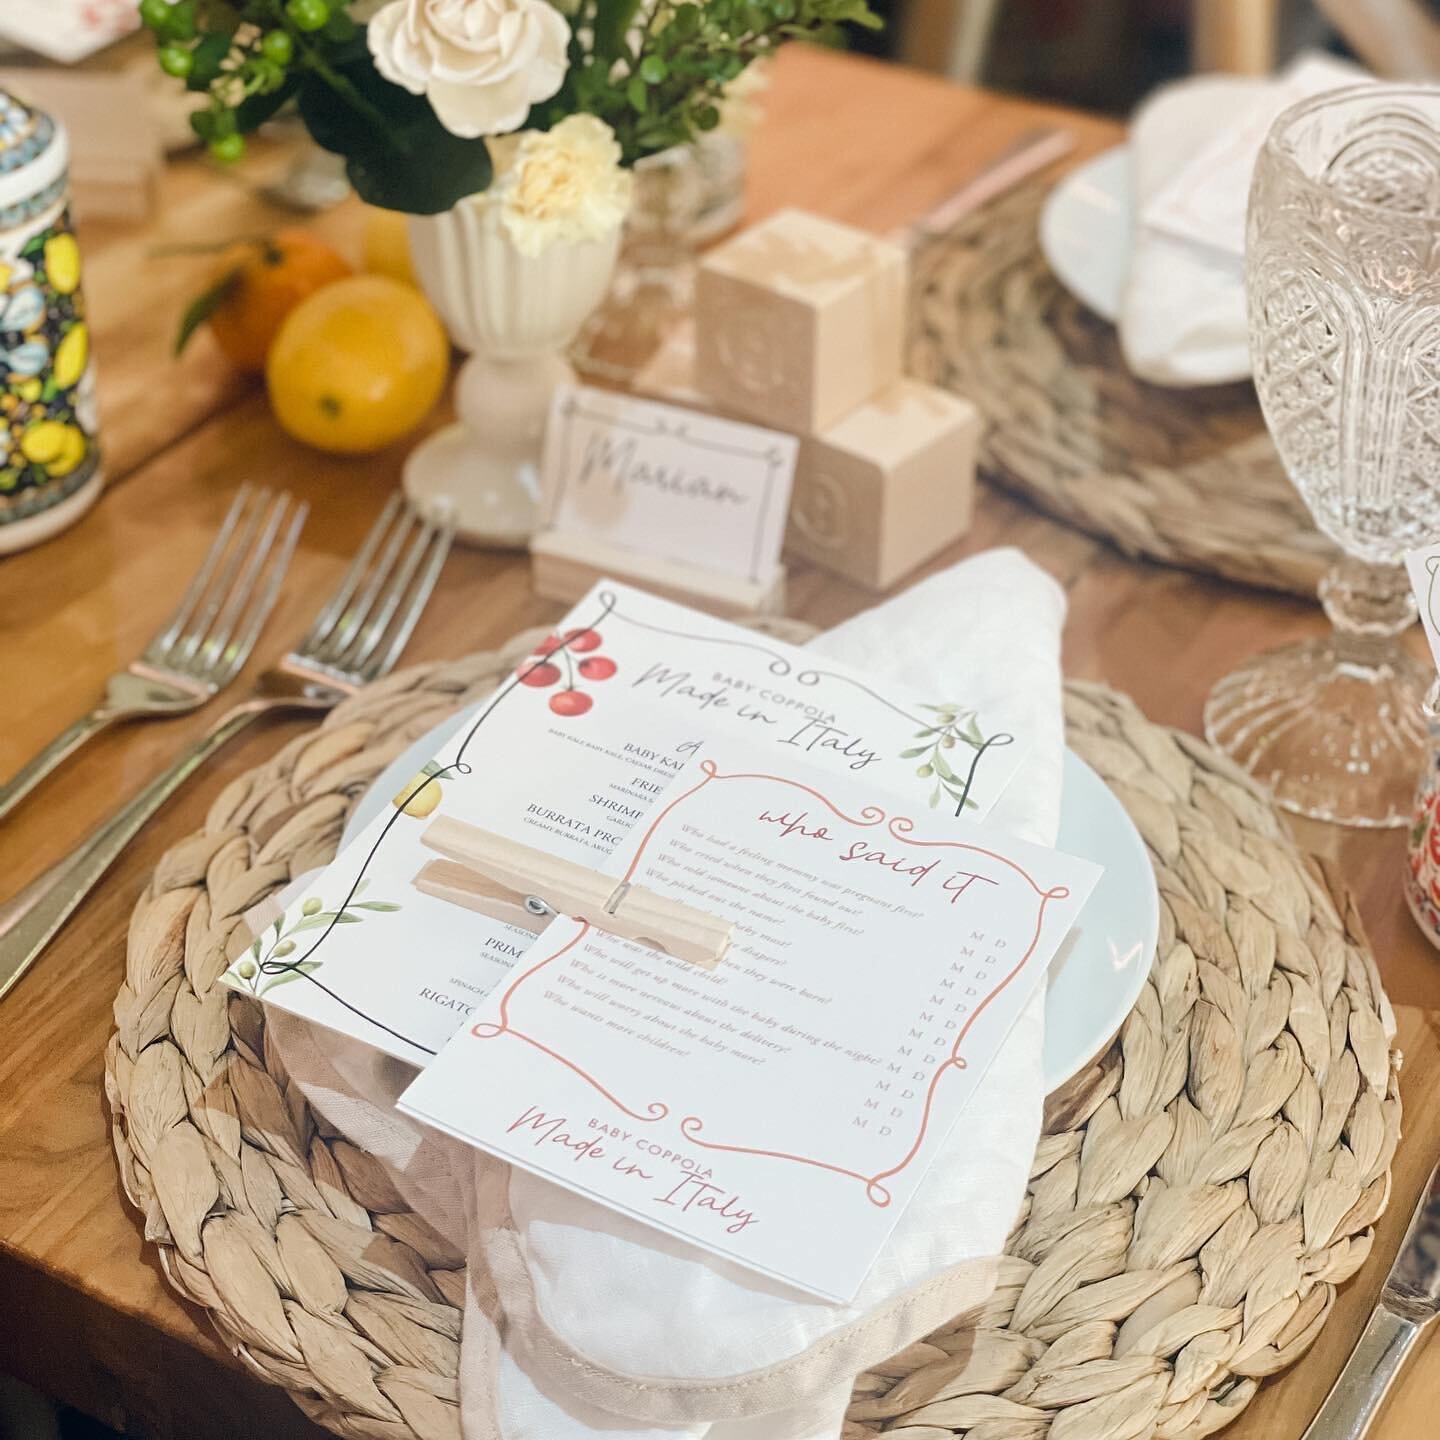 Made in Italy 🍋

such a fun baby shower for the mamma to be @courtneycoppola_ featuring our capri goblet, wren braided charger mat and wavy napkin in nude. 

ALL AVAILABLE FOR RENT AT
www.tabletalkrentals.com

#newyorkweddings #longislandwedding #ta